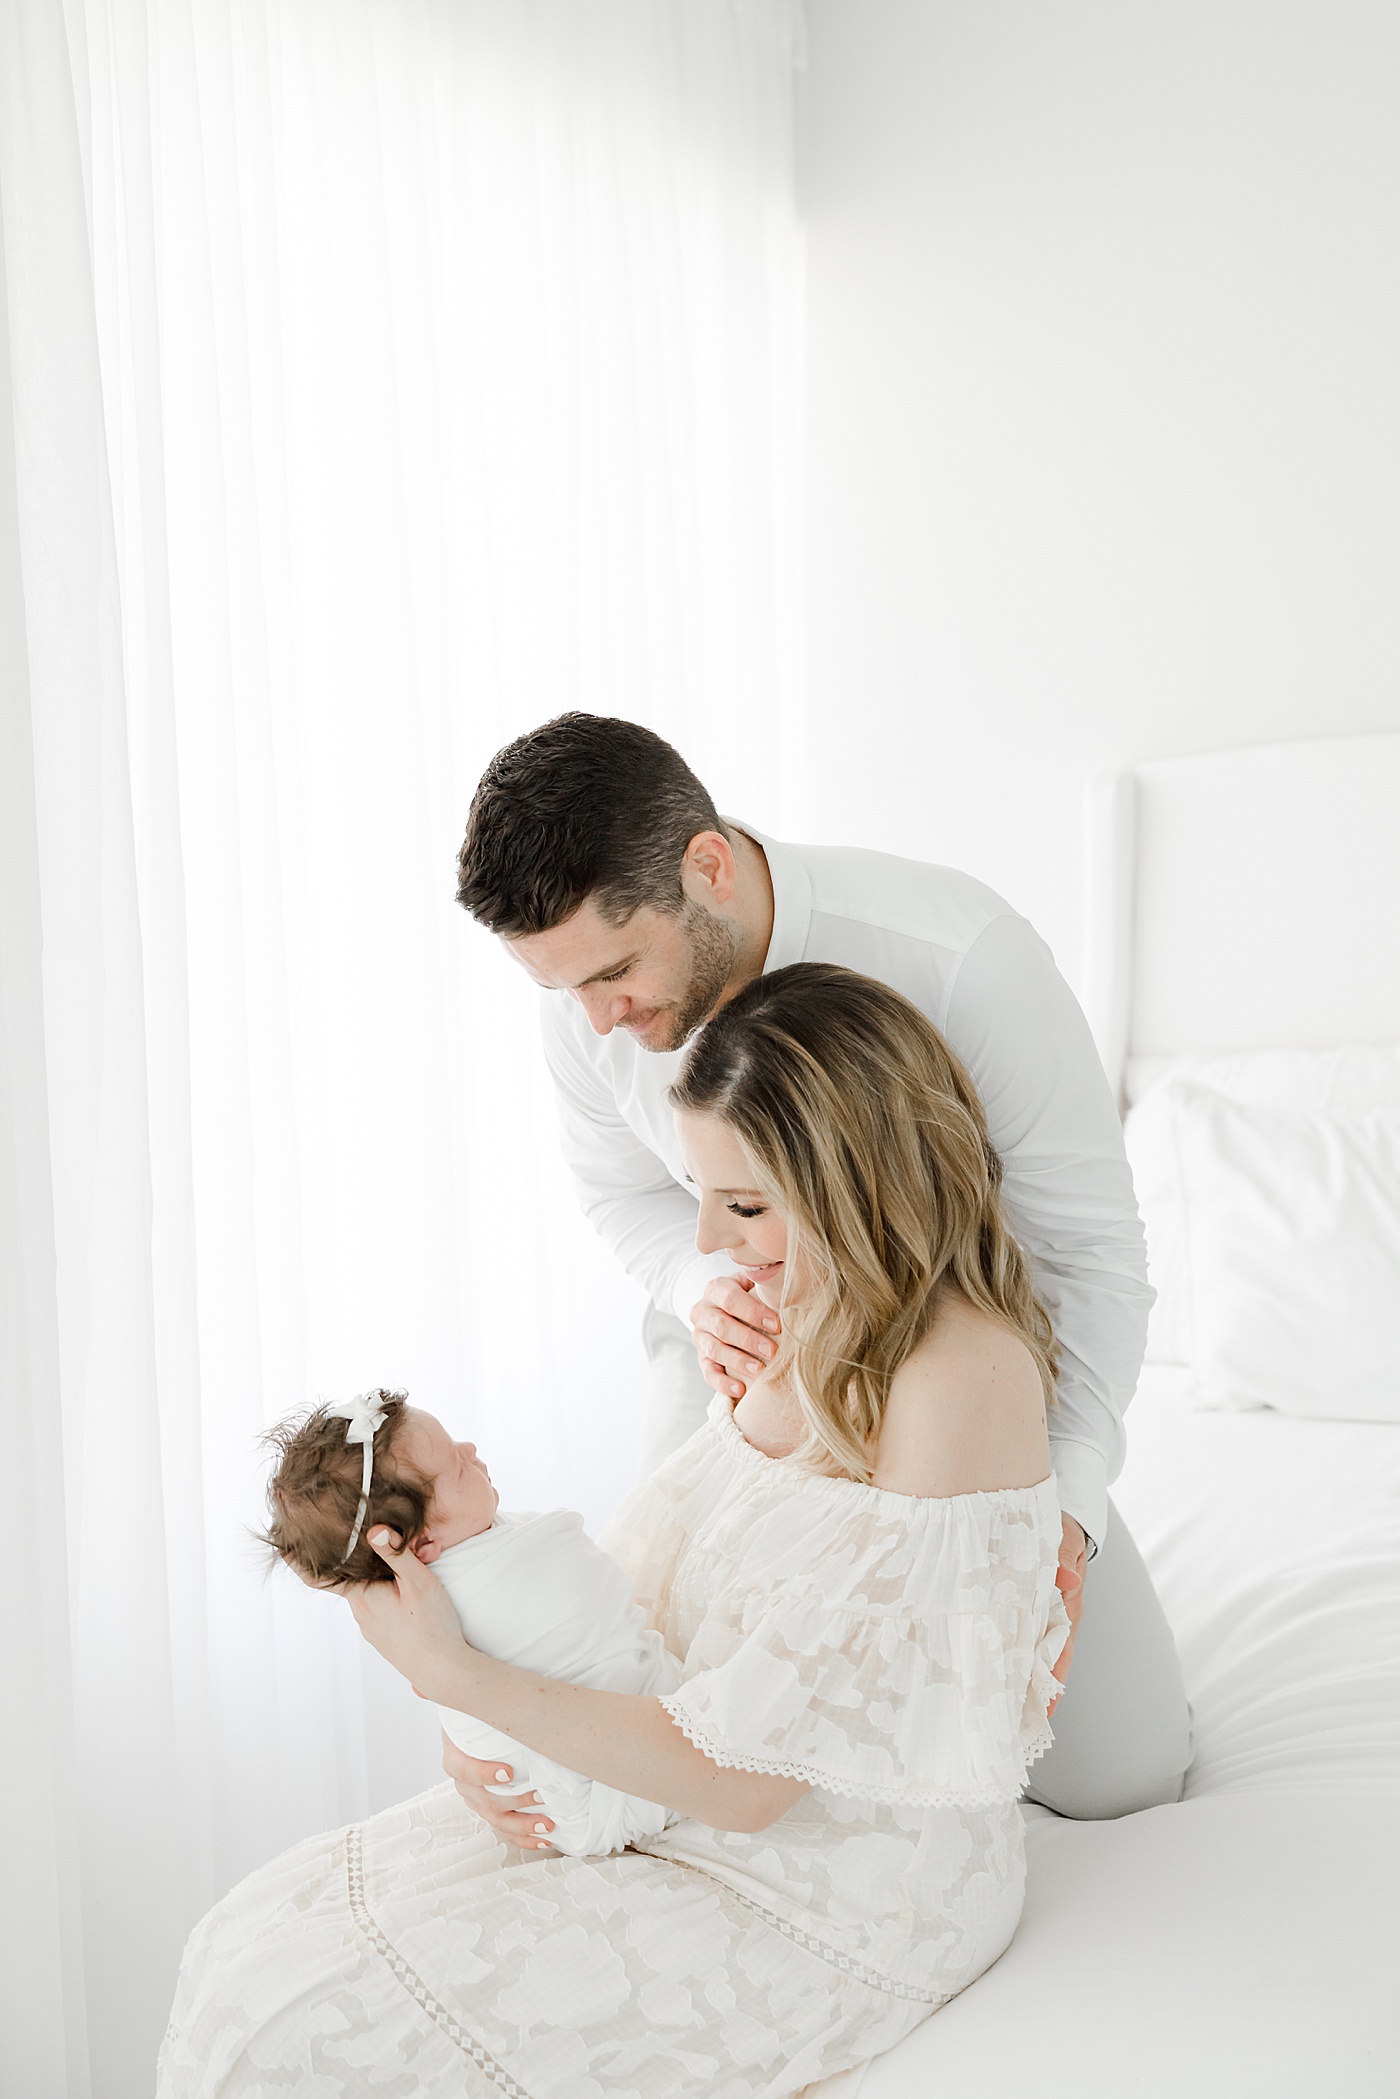 Mom and Dad looking at their newborn daughter | Kristin Wood Photography